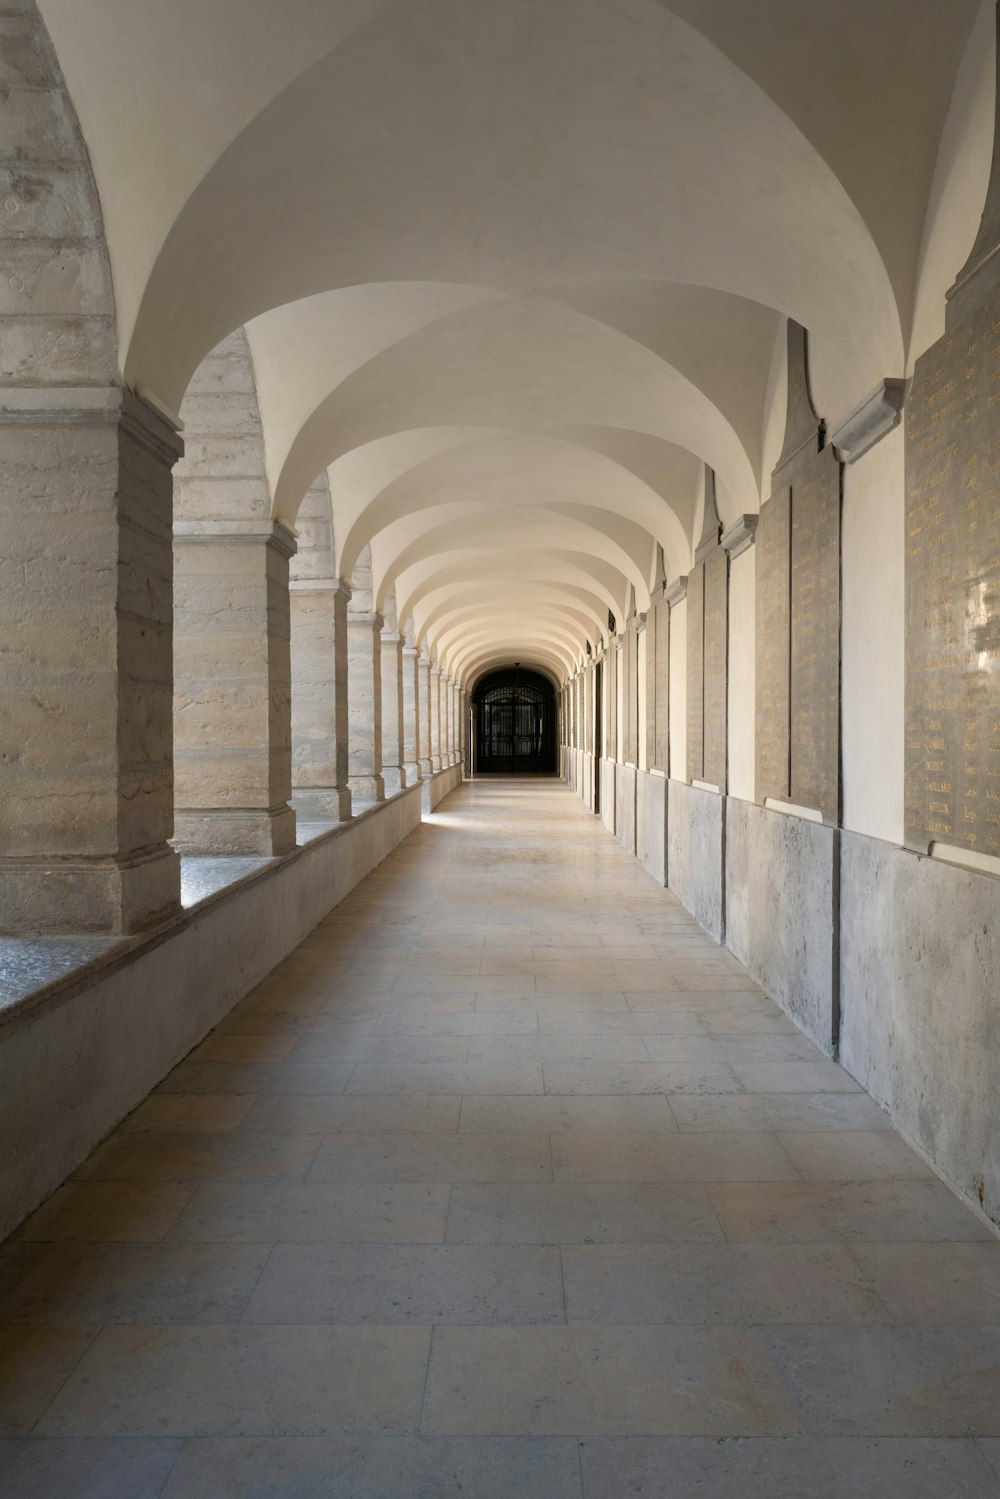 a long hallway with arches and a light at the end